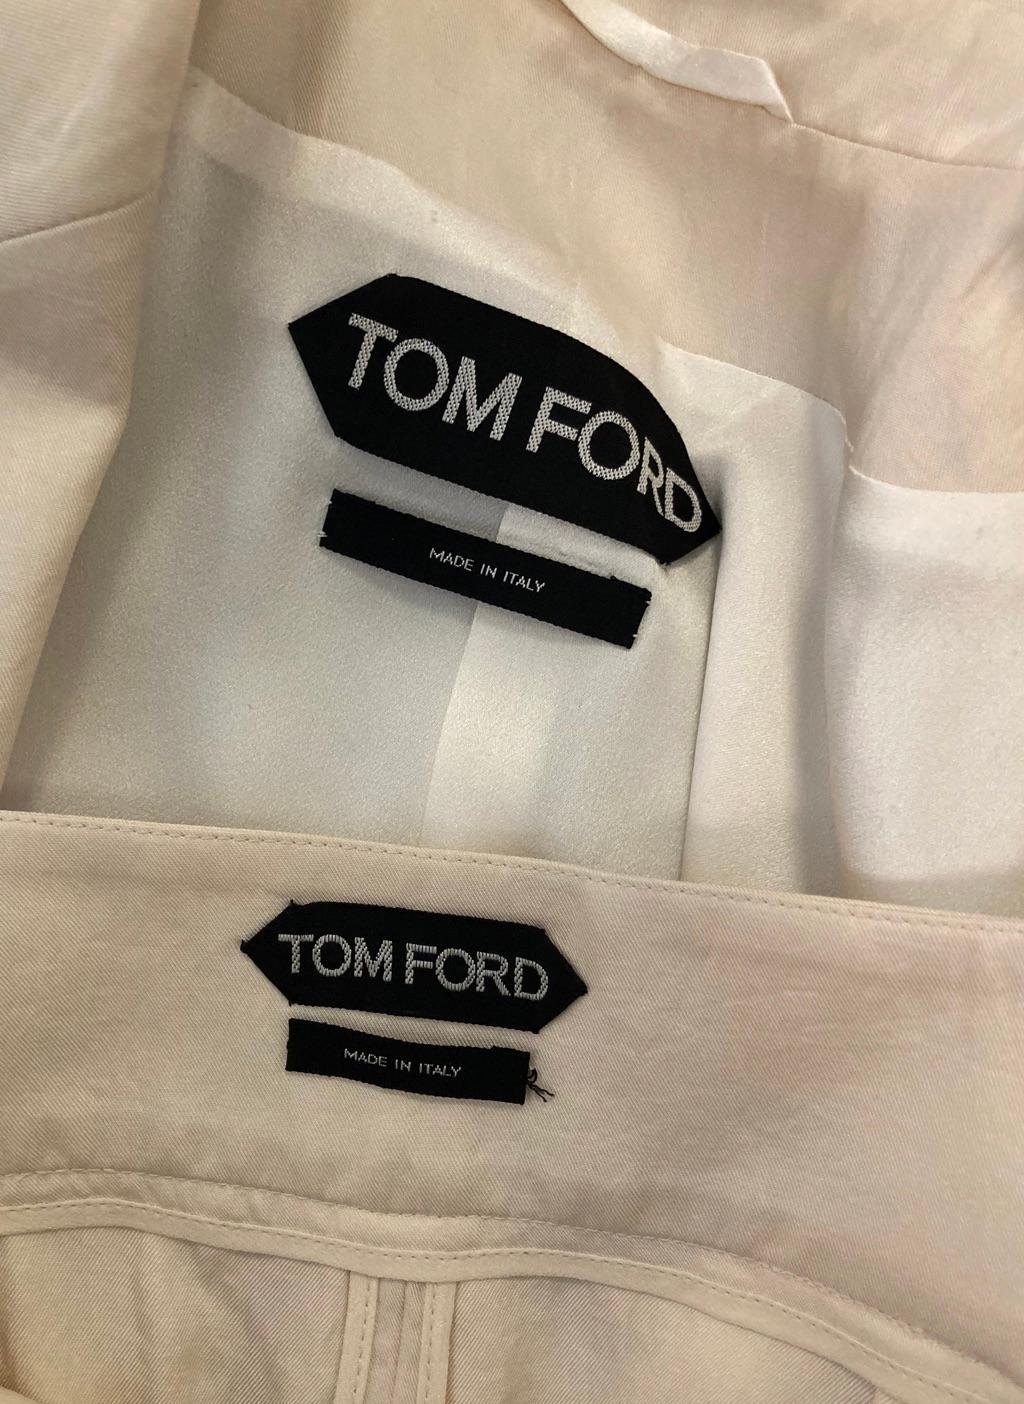 Ivory Tom Ford skirt suit from the eponymous brand. Silky ivory blazer style jacket and matching below the knee pencil skirt. The pencil skirt features gunmetal zipper detail running up the front which zips half way create a slit where the matching